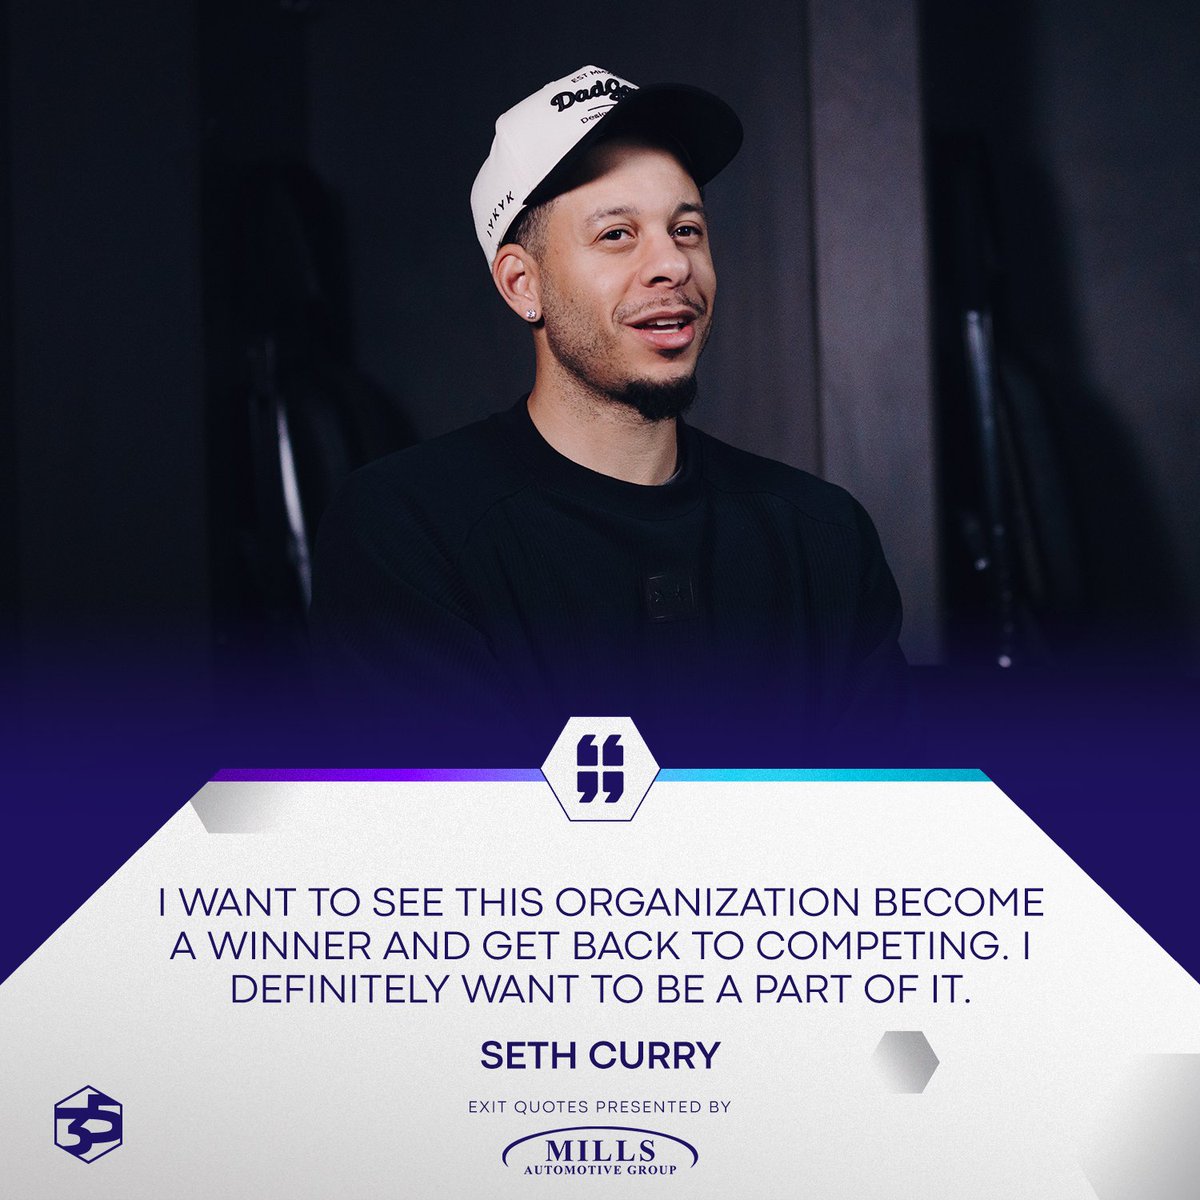 Seth Curry looking ahead ⏭ #LetsFly35 | @Mills_AutoGroup